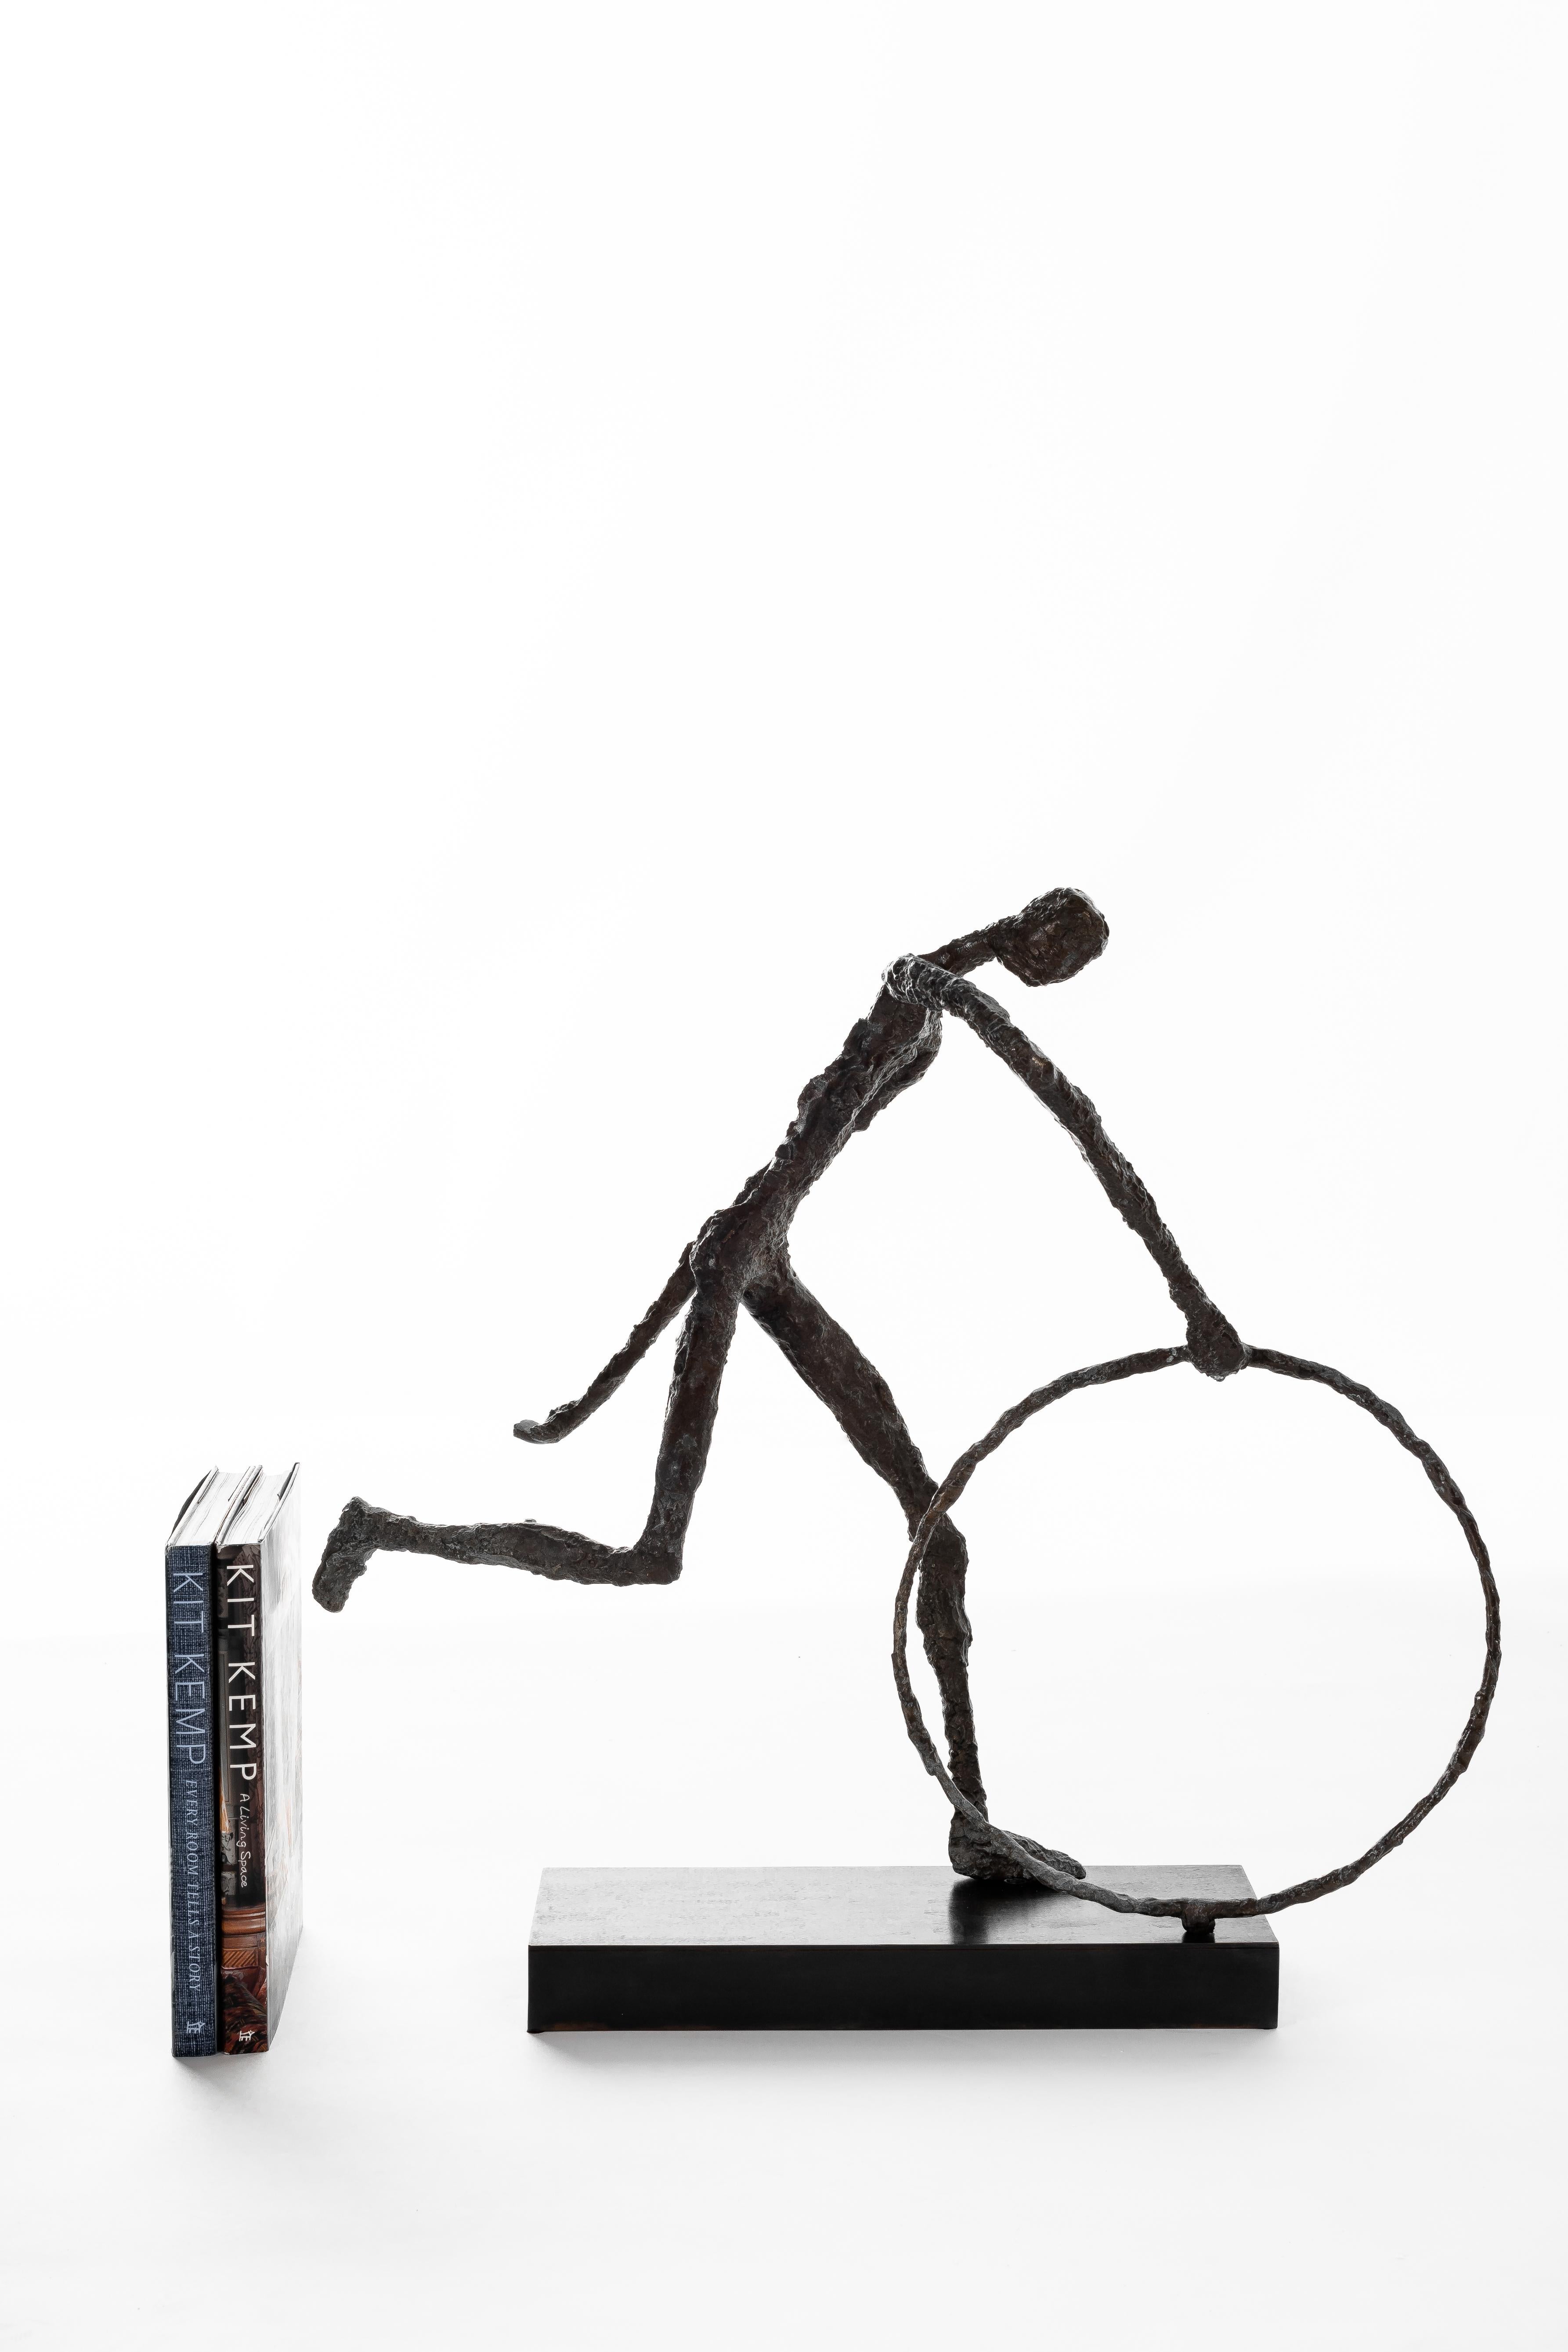 Brutalist acrobat metal figure on modern stand.

Piece from our one of a kind collection, Le Monde.